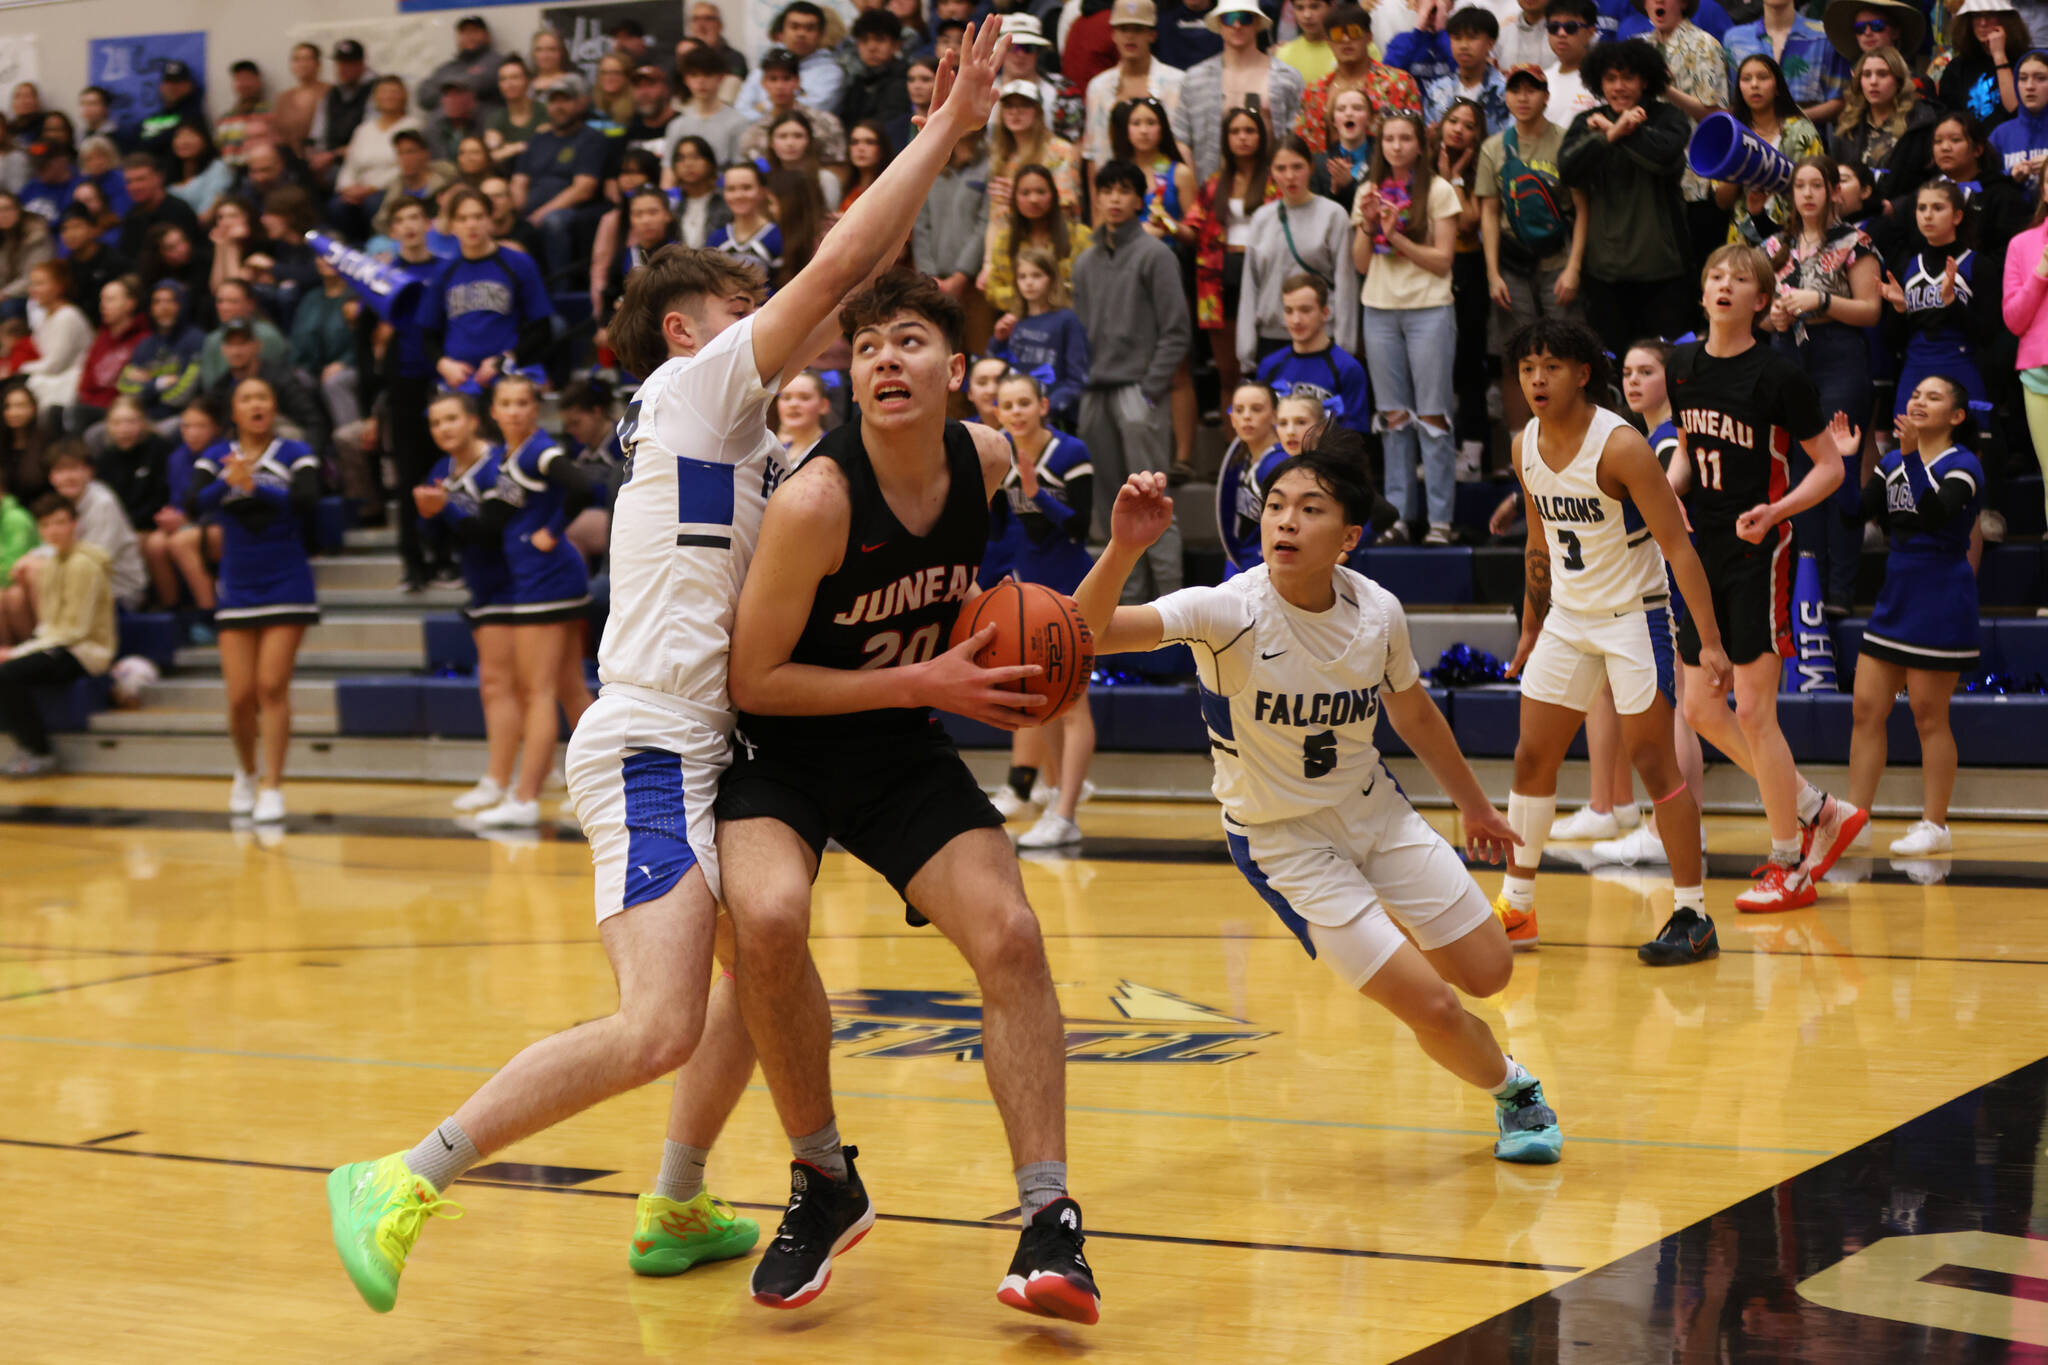 Ben Hohenstatt / Juneau Empire
JDHS senior Orion Dybdahl goes in for a layup against TMHS during a conference game early this season. The two cross-town rivals are set to play games for the Region V Tournament this week.